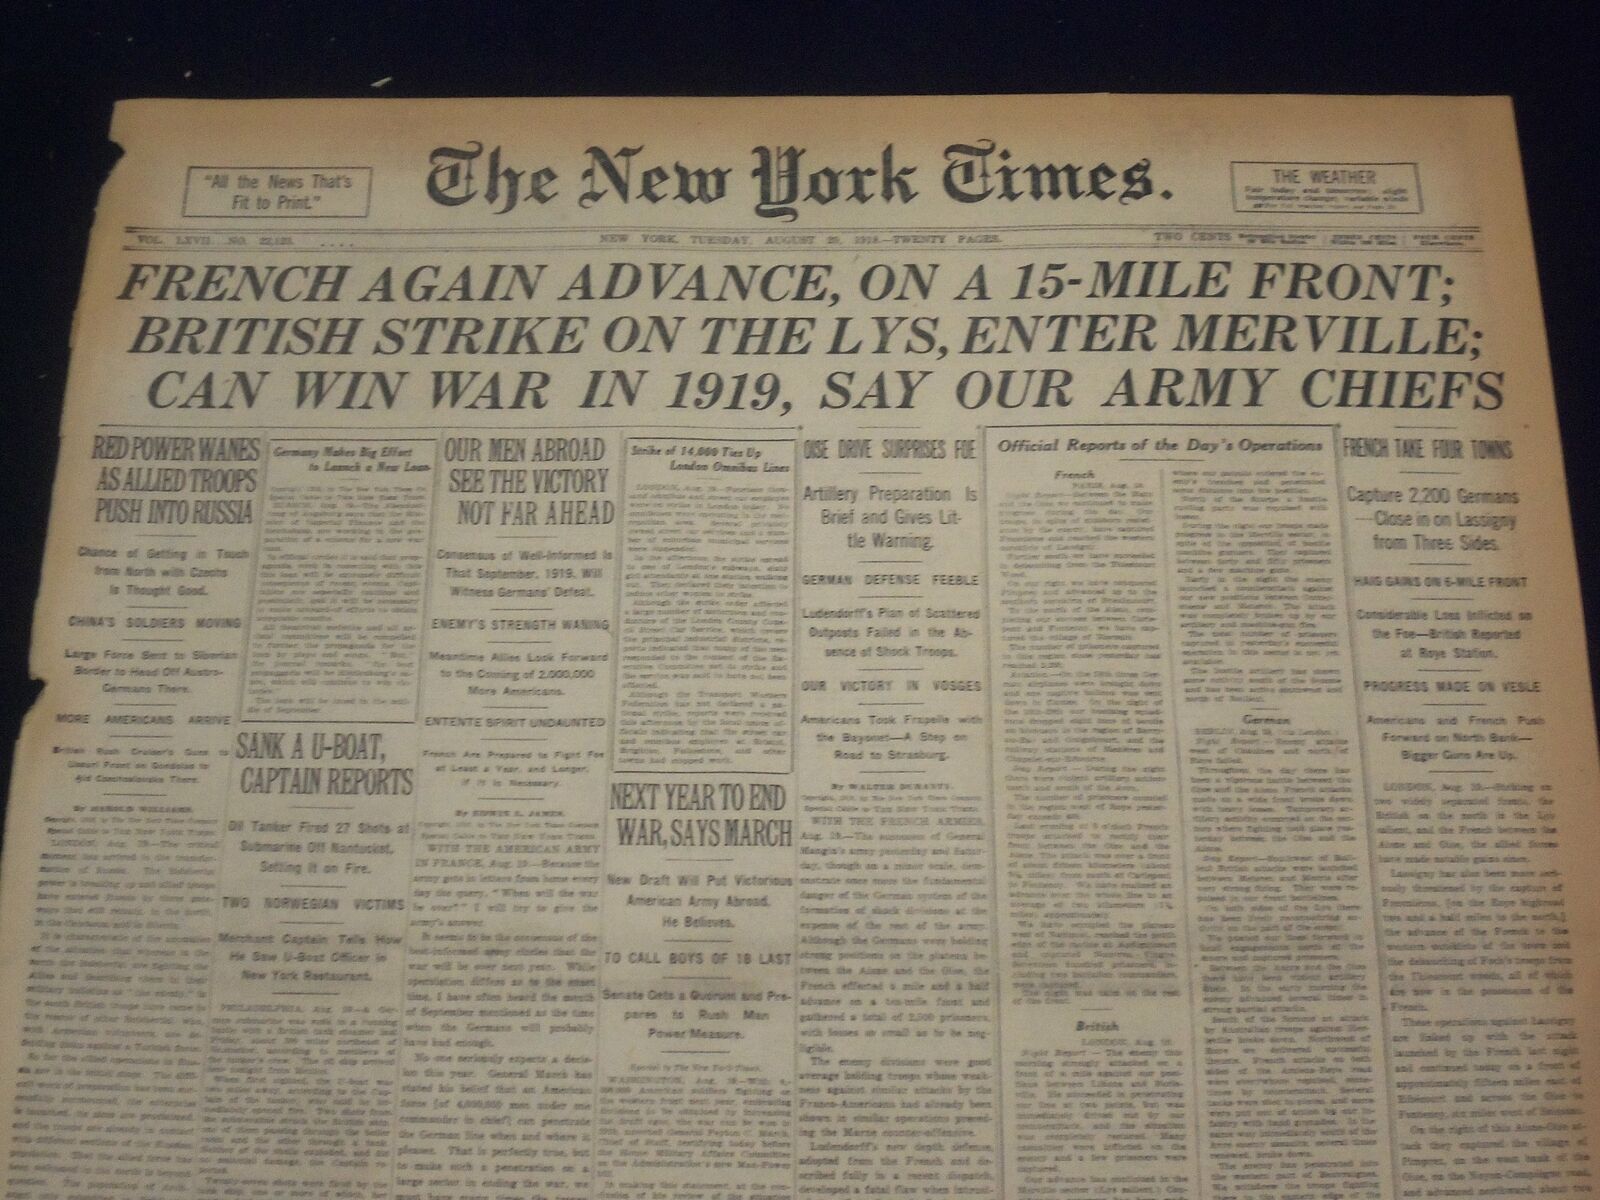 1918 AUGUST 20 NEW YORK TIMES - CAN WIN WAR IN 1919, ARMY CHIEFS - NT 9206